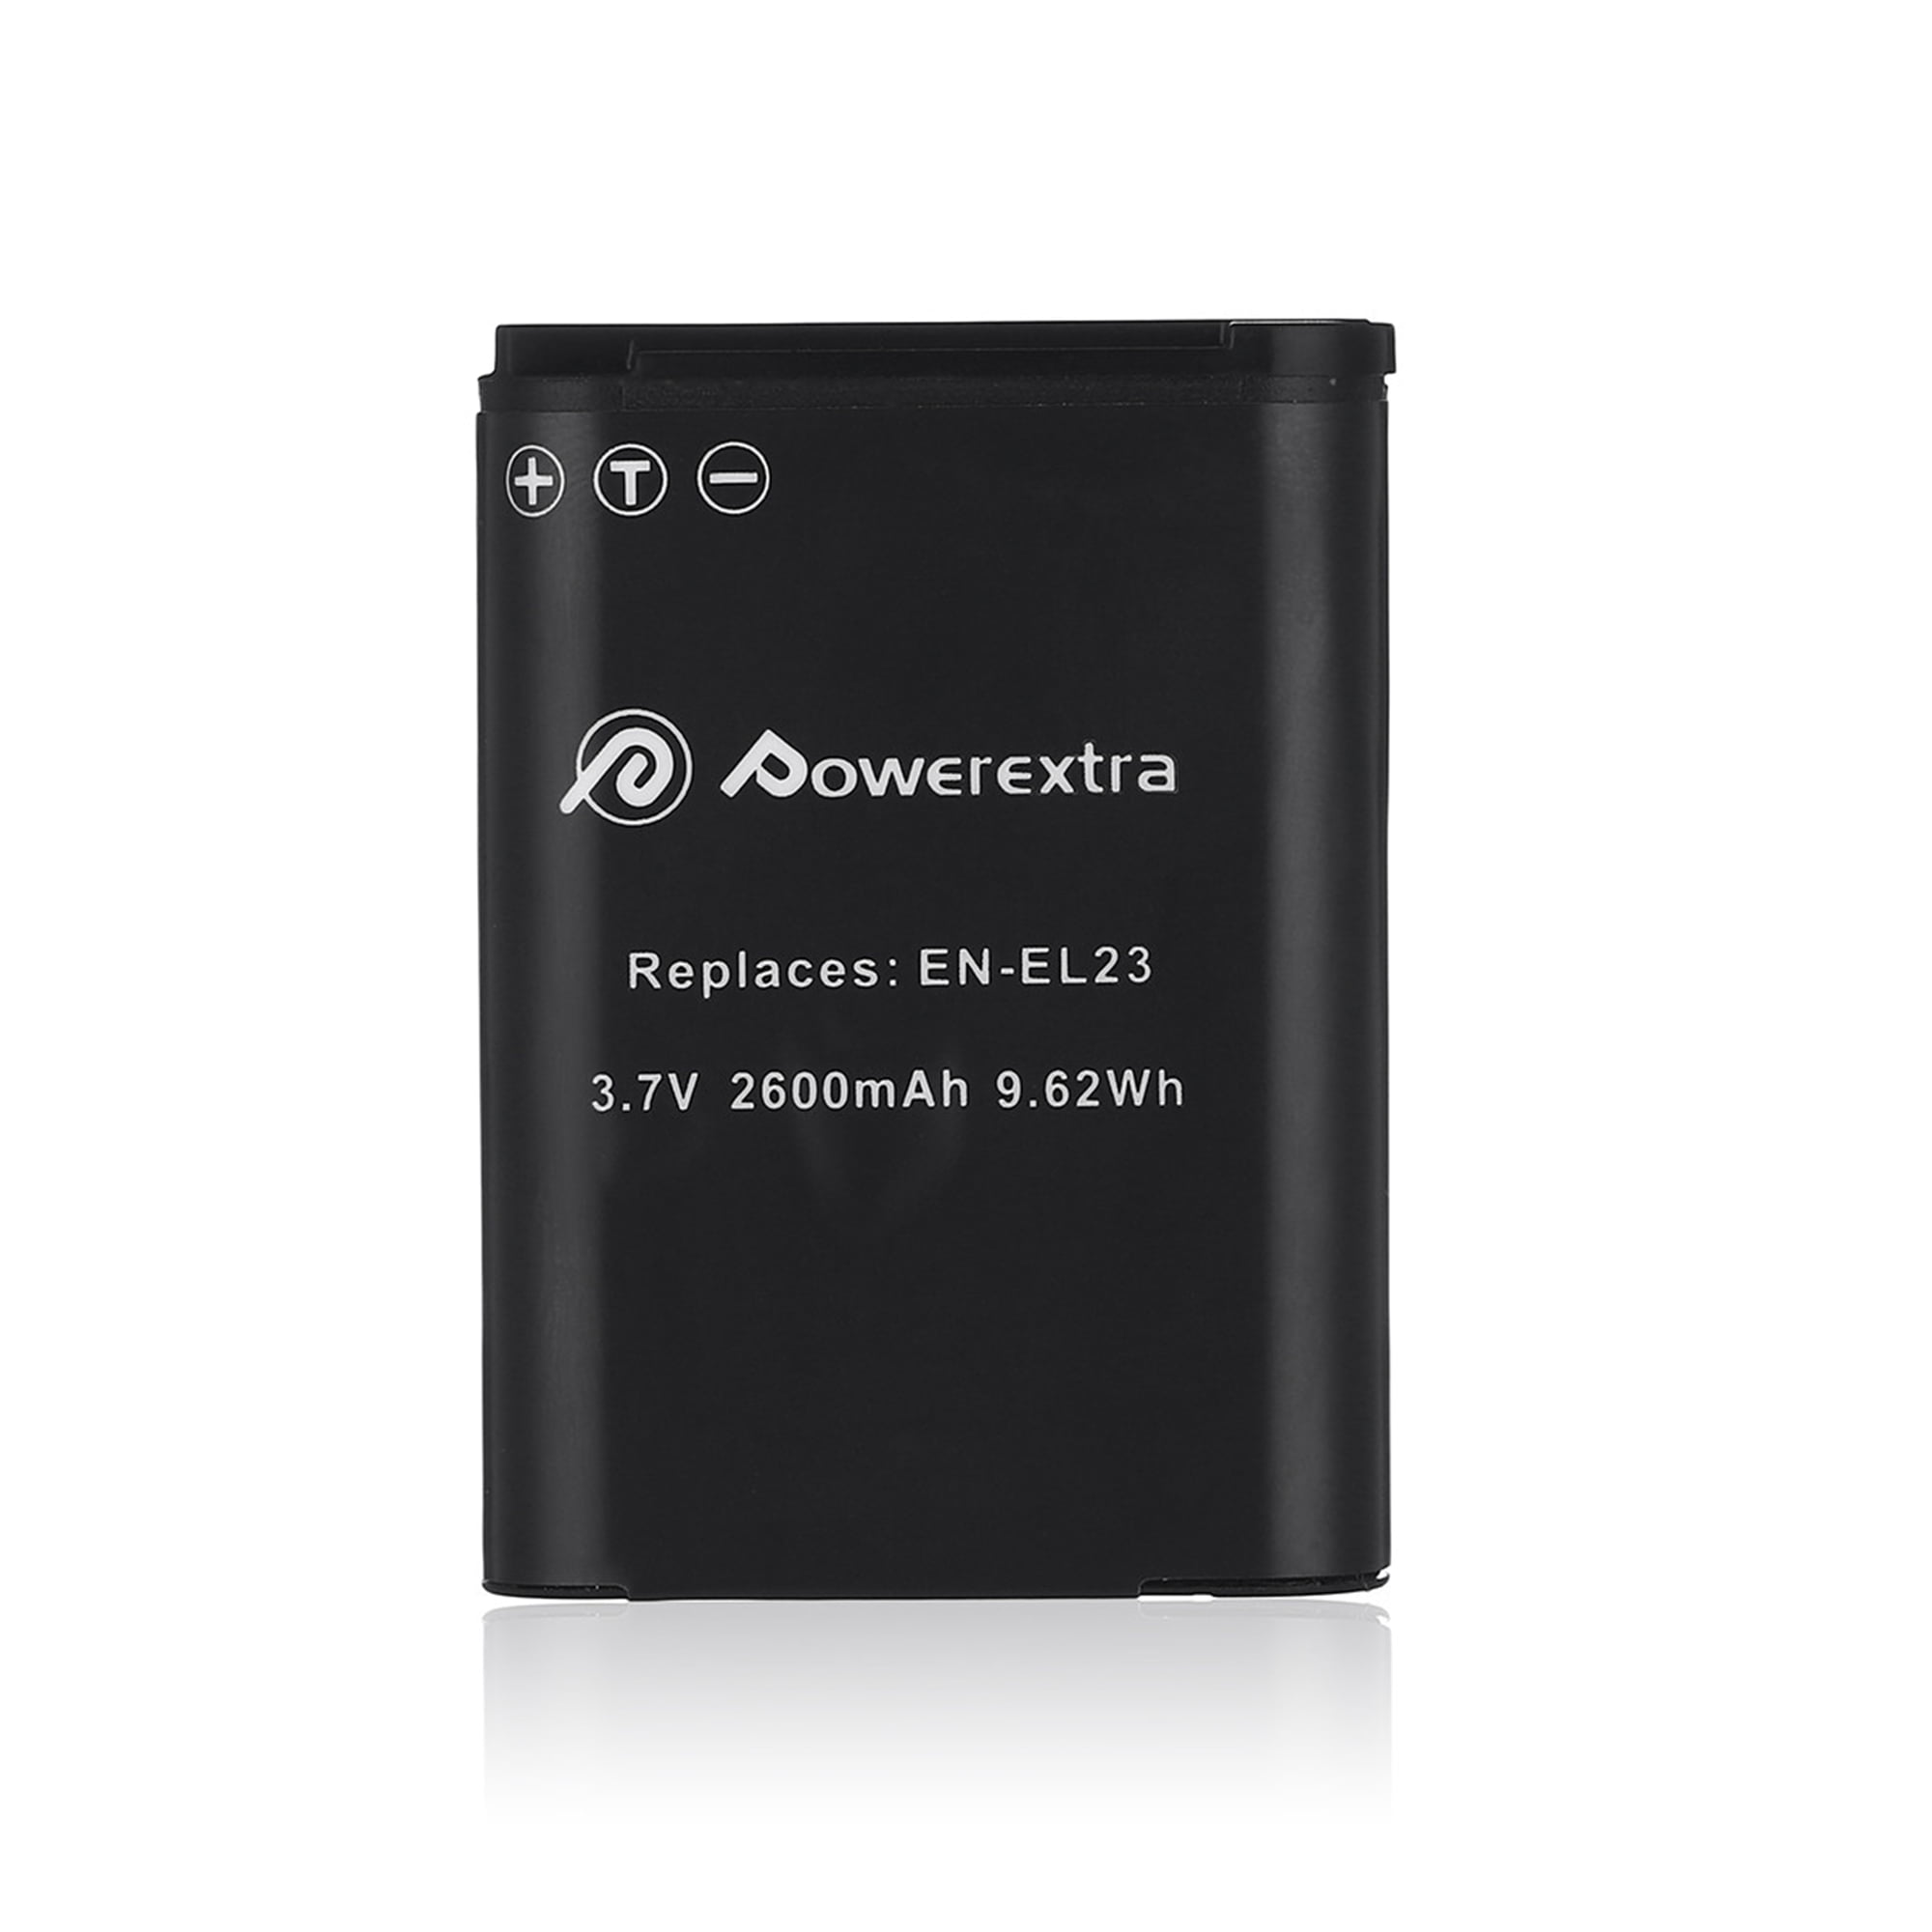 S810c P610 Powerextra 2 x 2600mAh EN-EL23 Battery and Charger with LCD Display Compatible with Nikon Coolpix P600 P900 B700